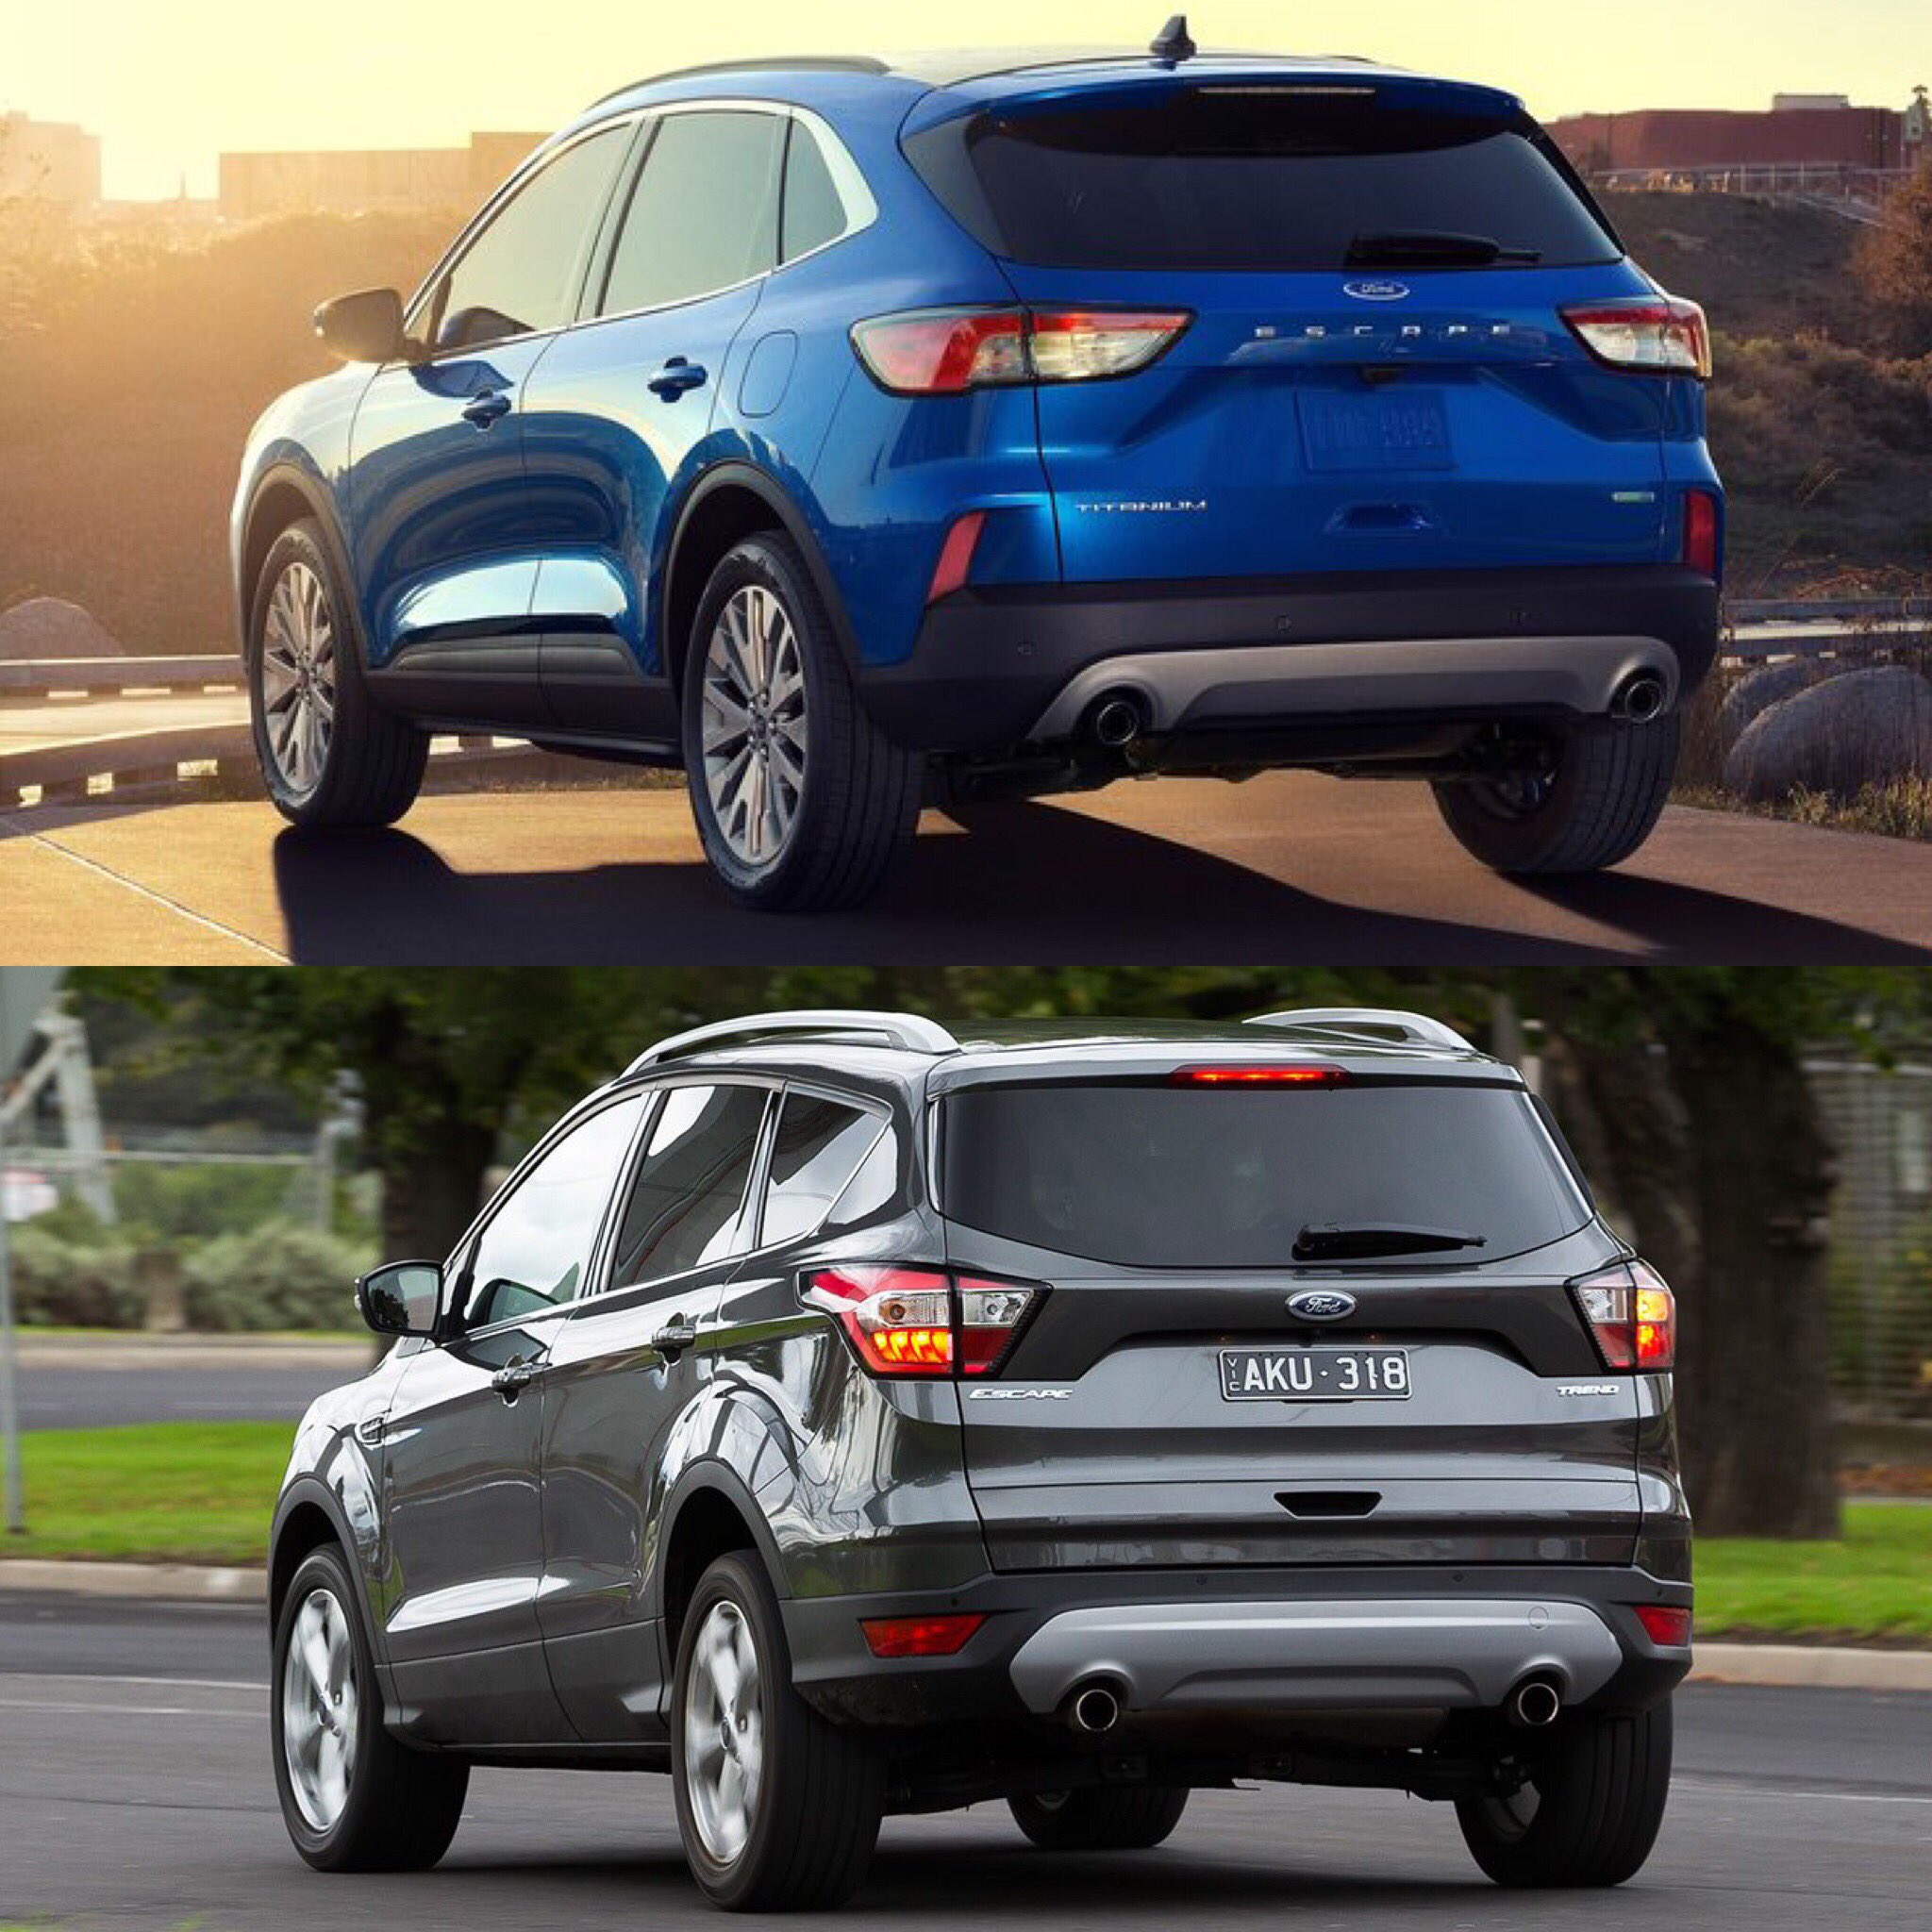 Car Industry Analysis on X: Dramatic change for allnew #Ford Kuga